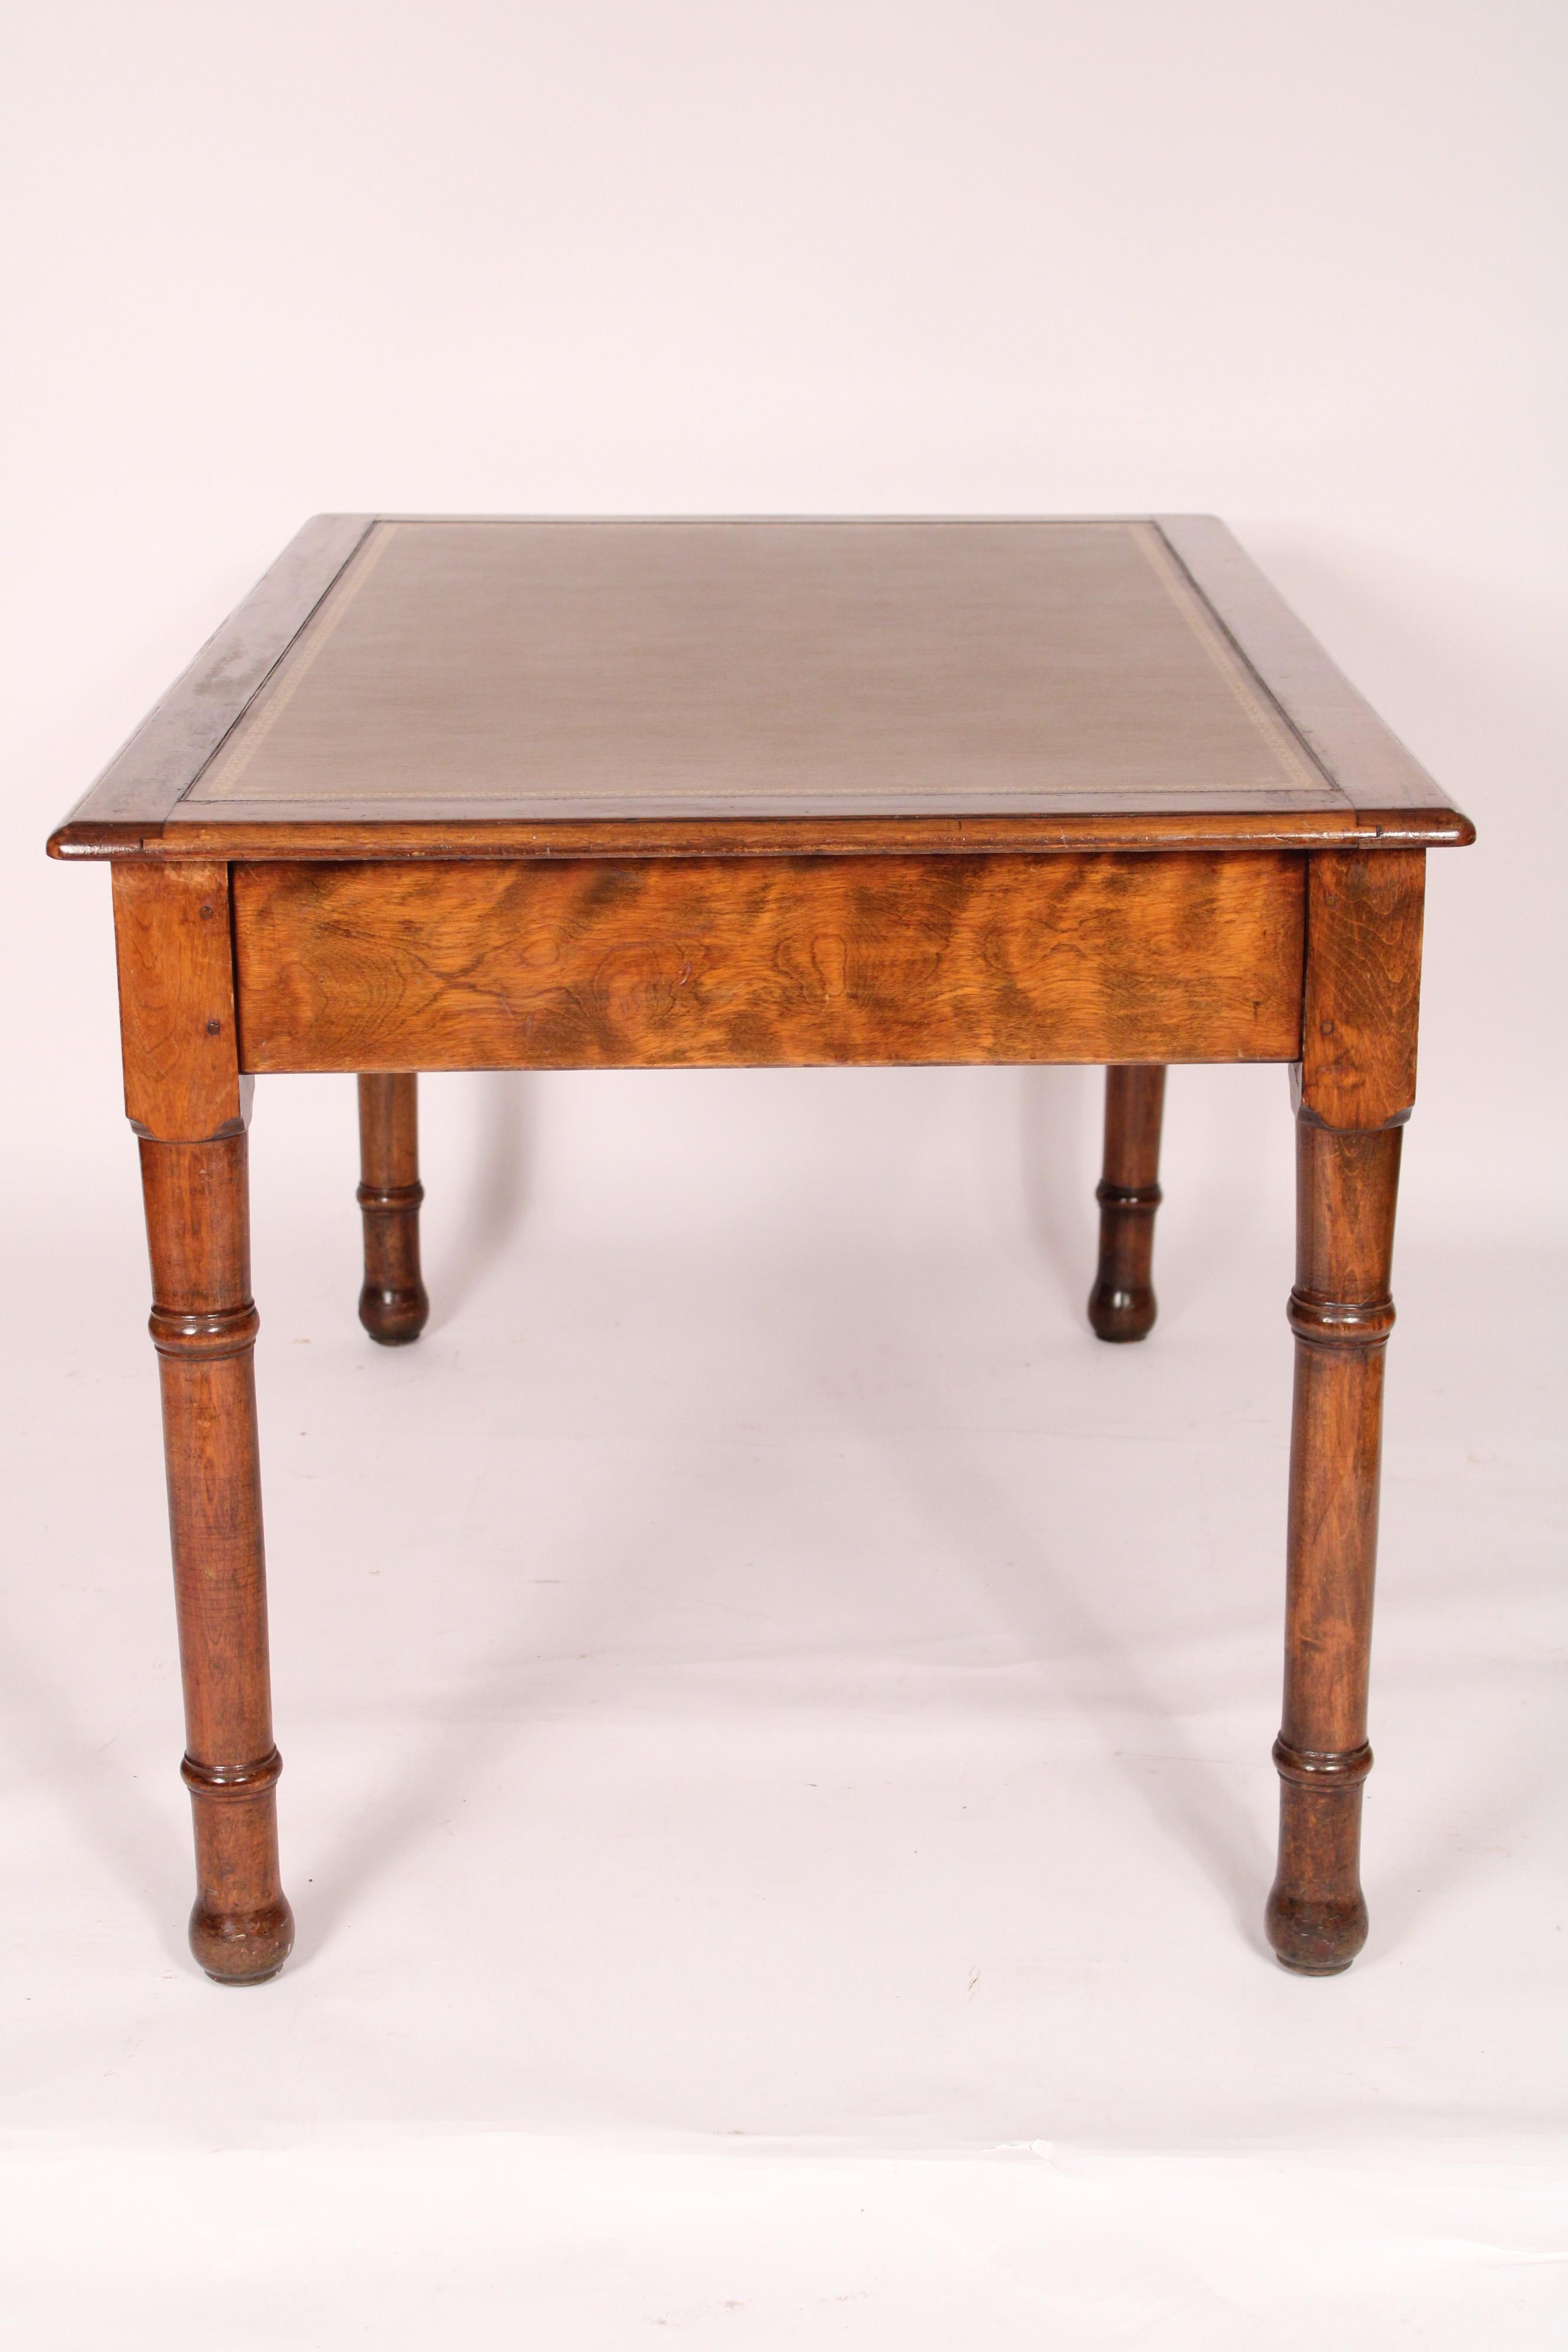 Early 20th Century English Edwardian Beechwood Writing Table with a Tooled Leather Top